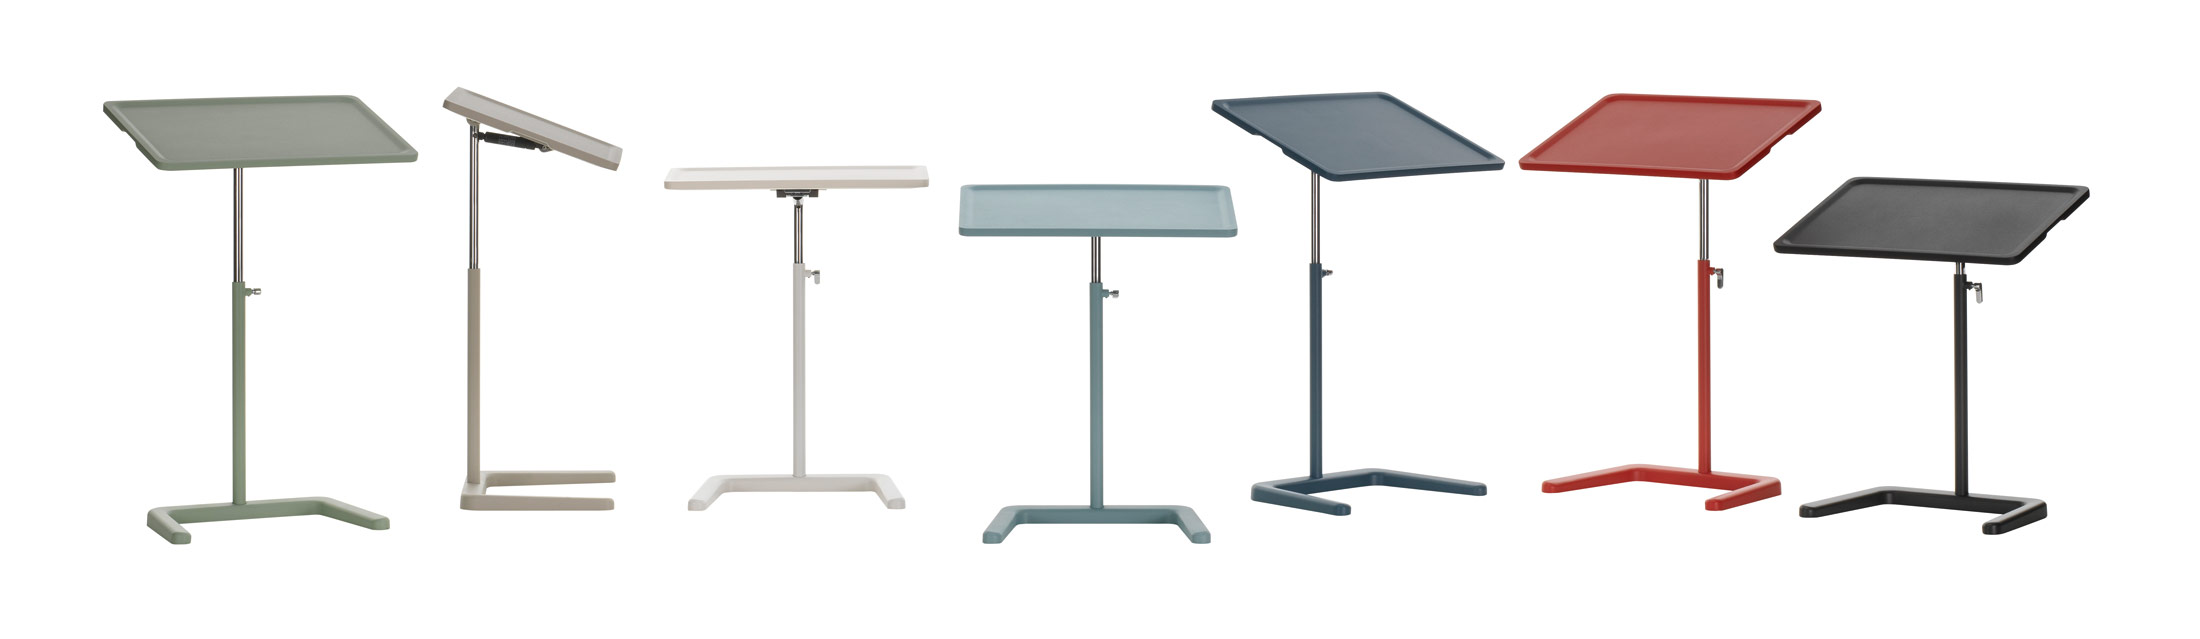 Vitra NesTable Group Image All Colours